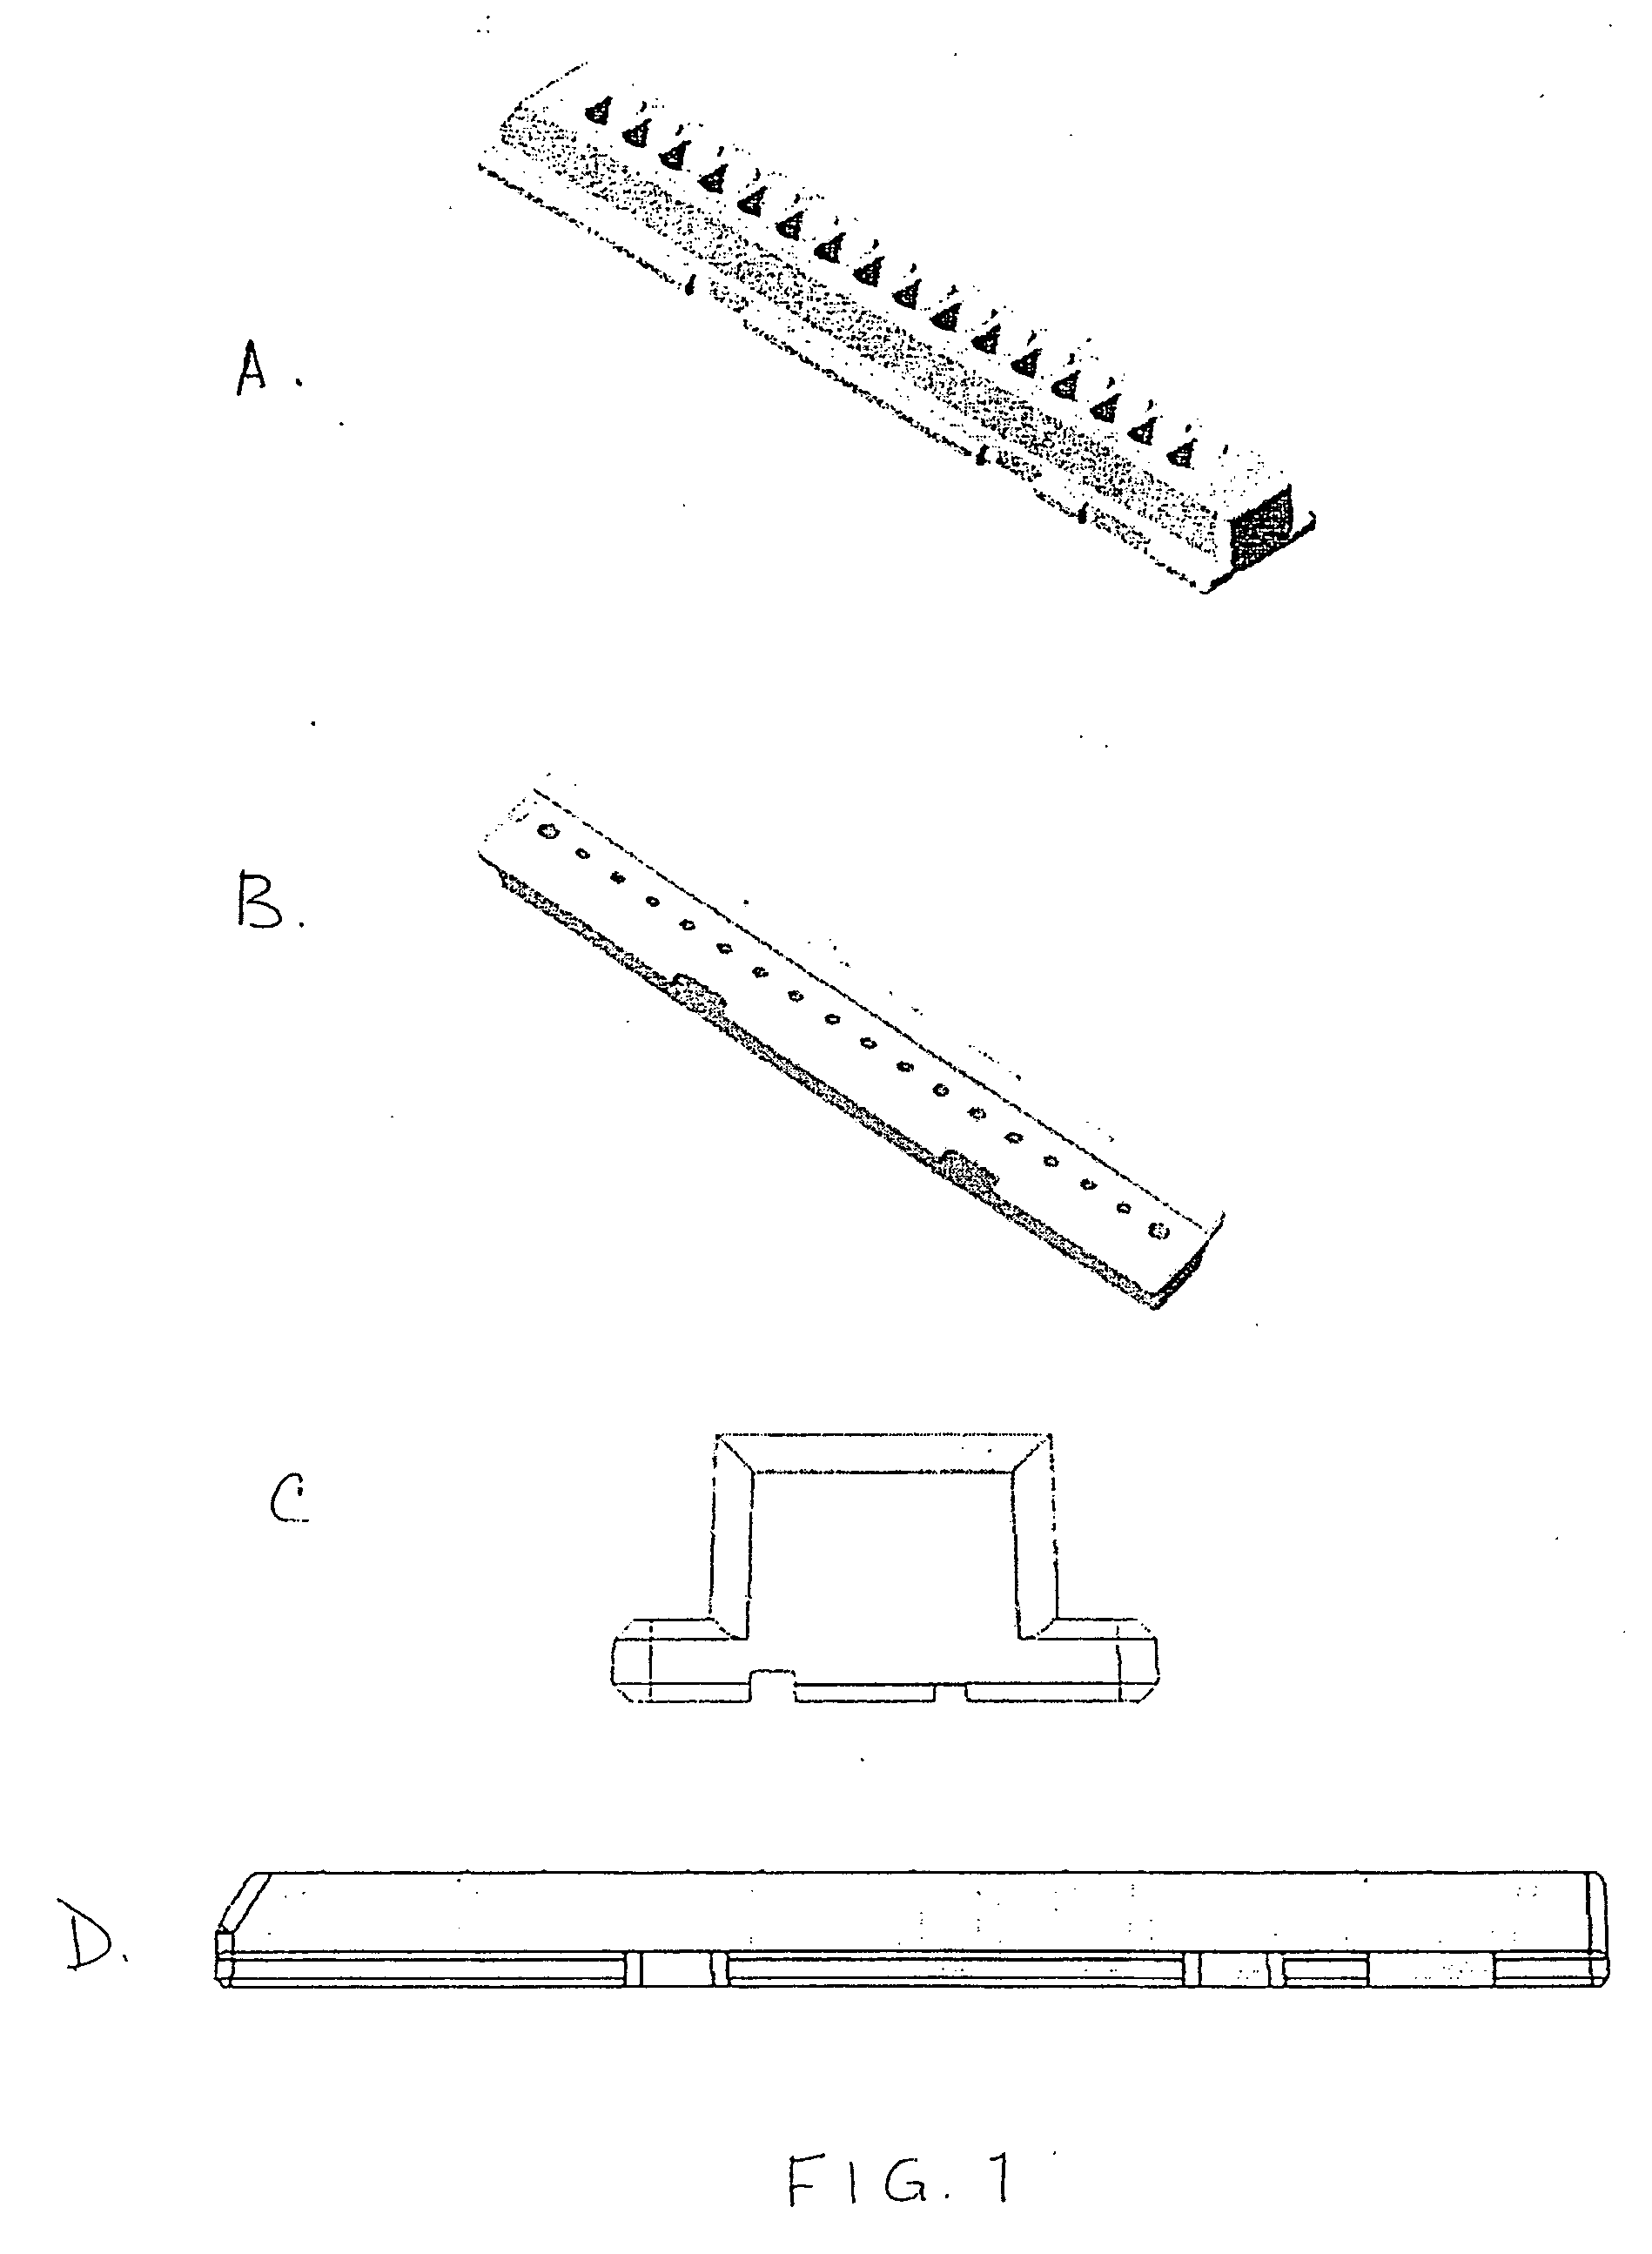 High-density ion transport measurement biochip devices and methods